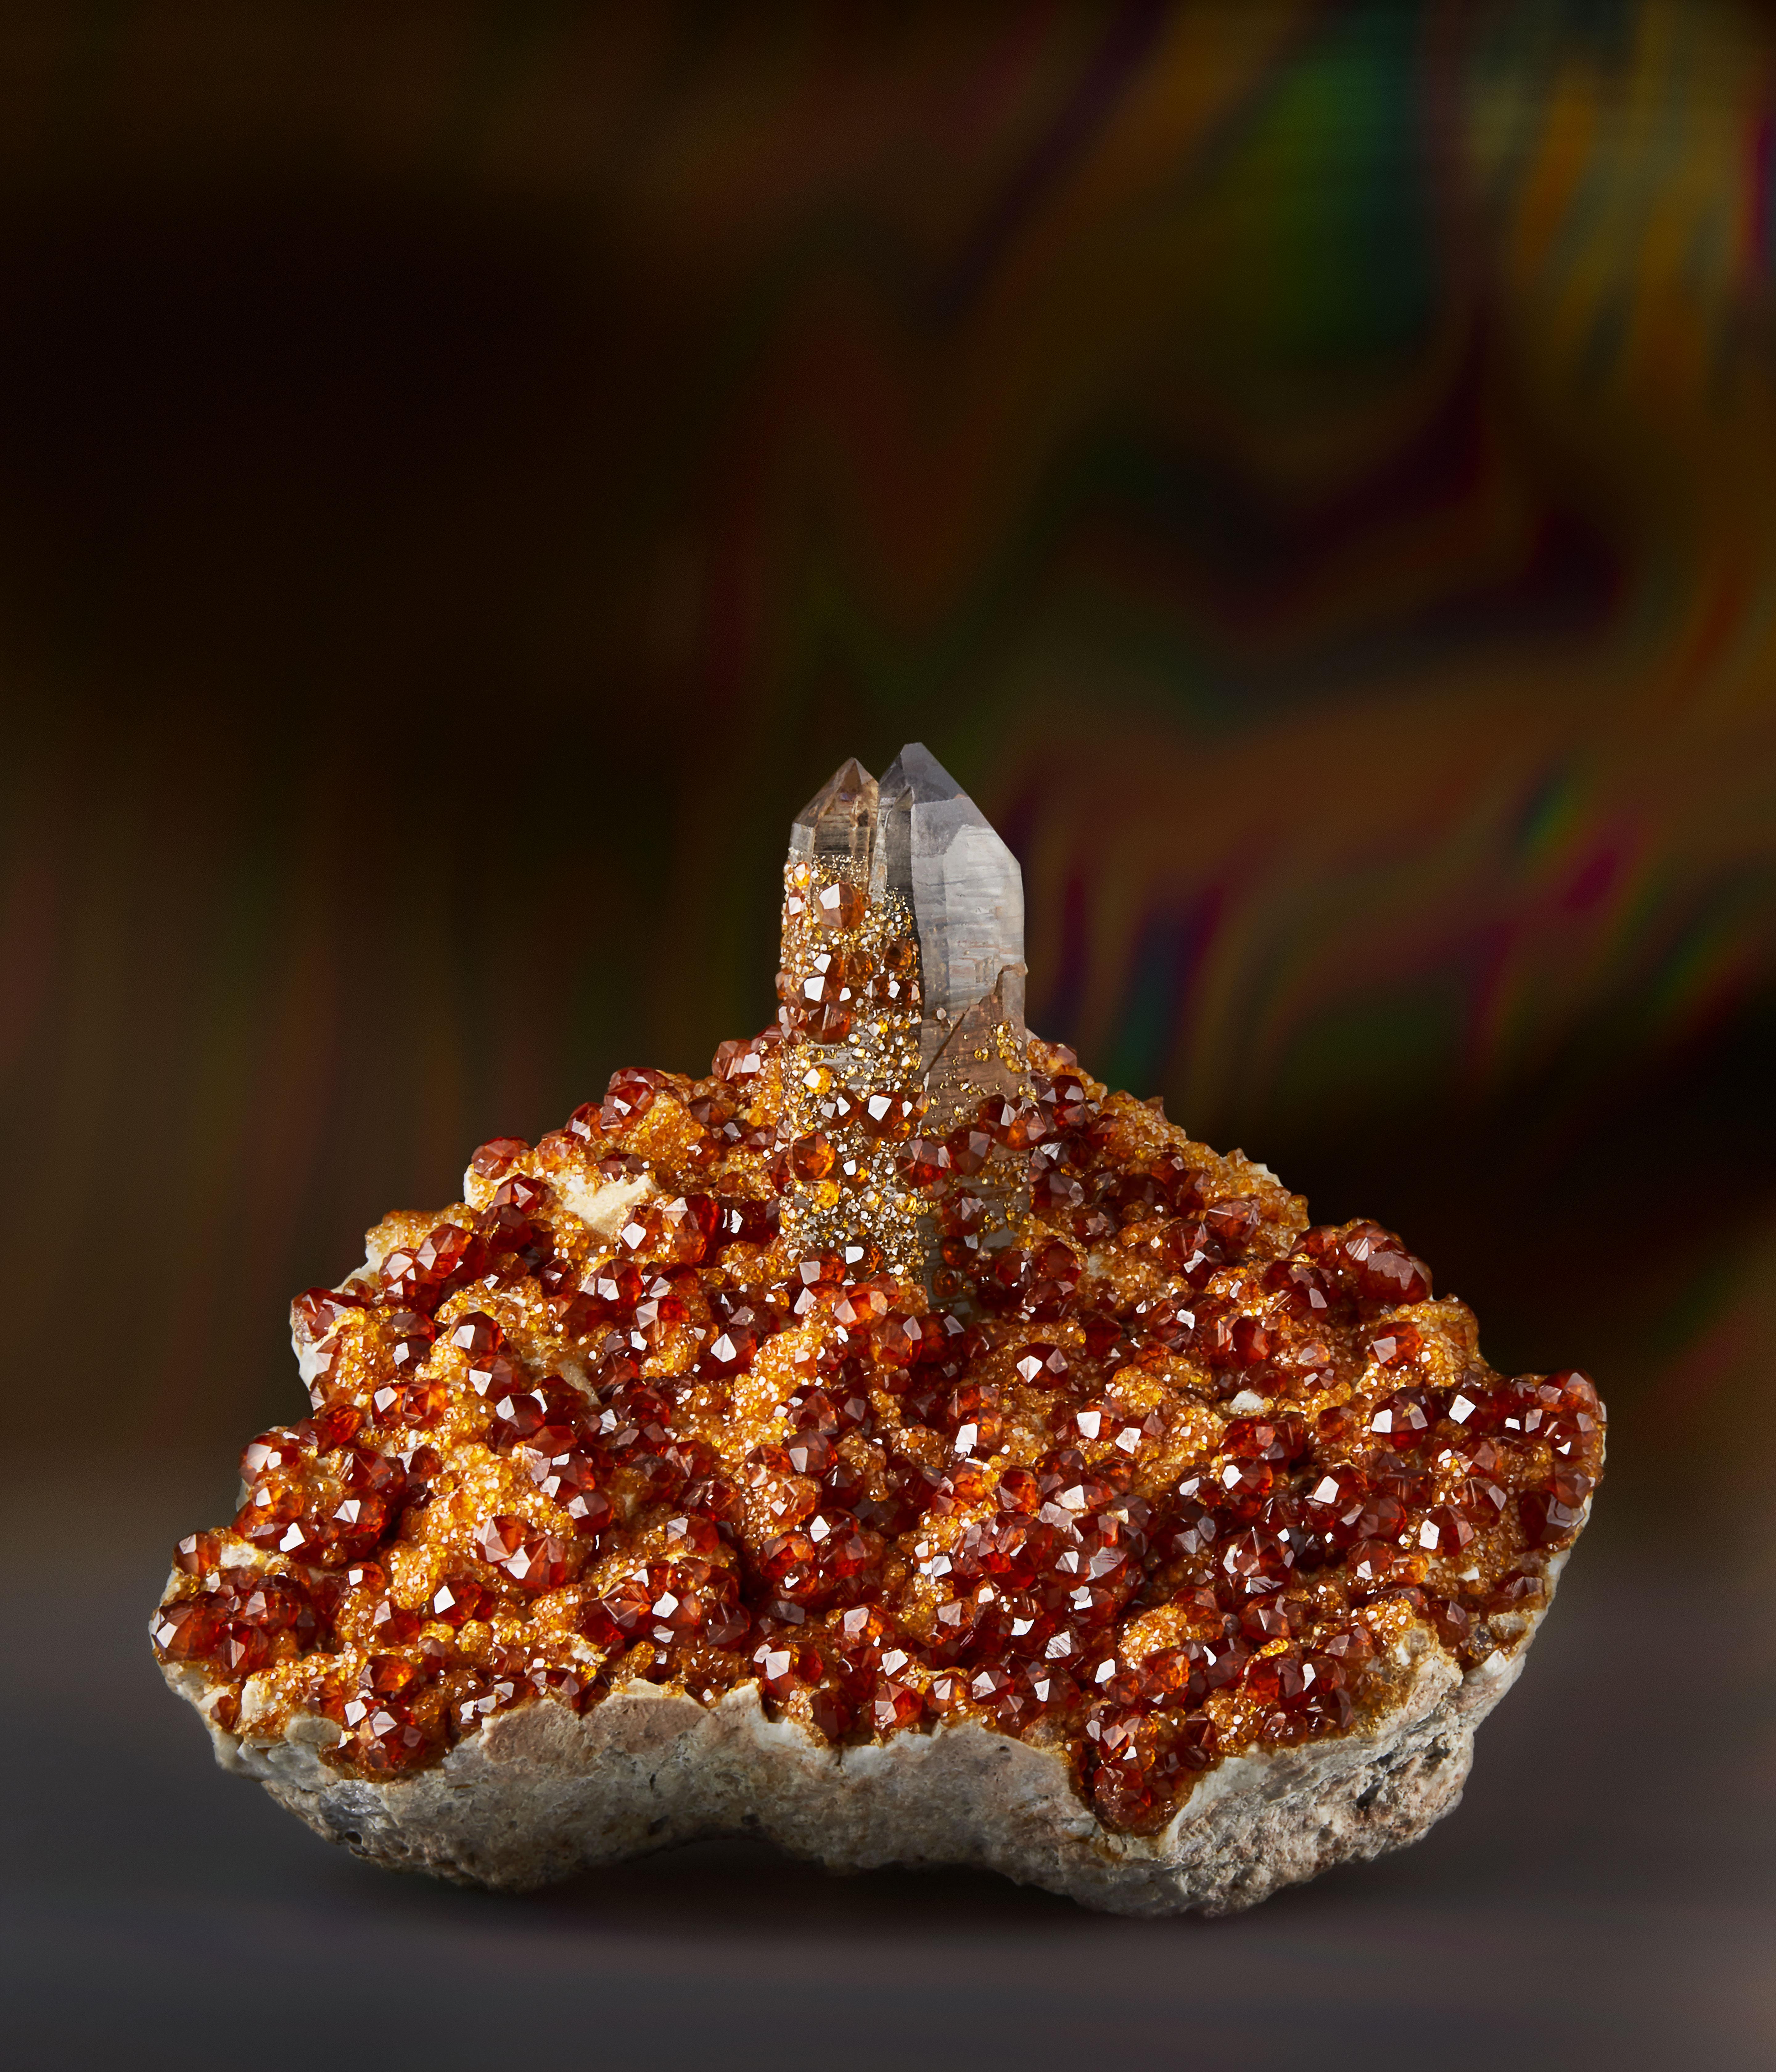 These sharp and brilliant spessartine trapezohedrons with smoky quartz began appearing on the market in early 2000. The Tongbei region is now quite well known as producing some of the finest examples for this combination of species. The gem clear